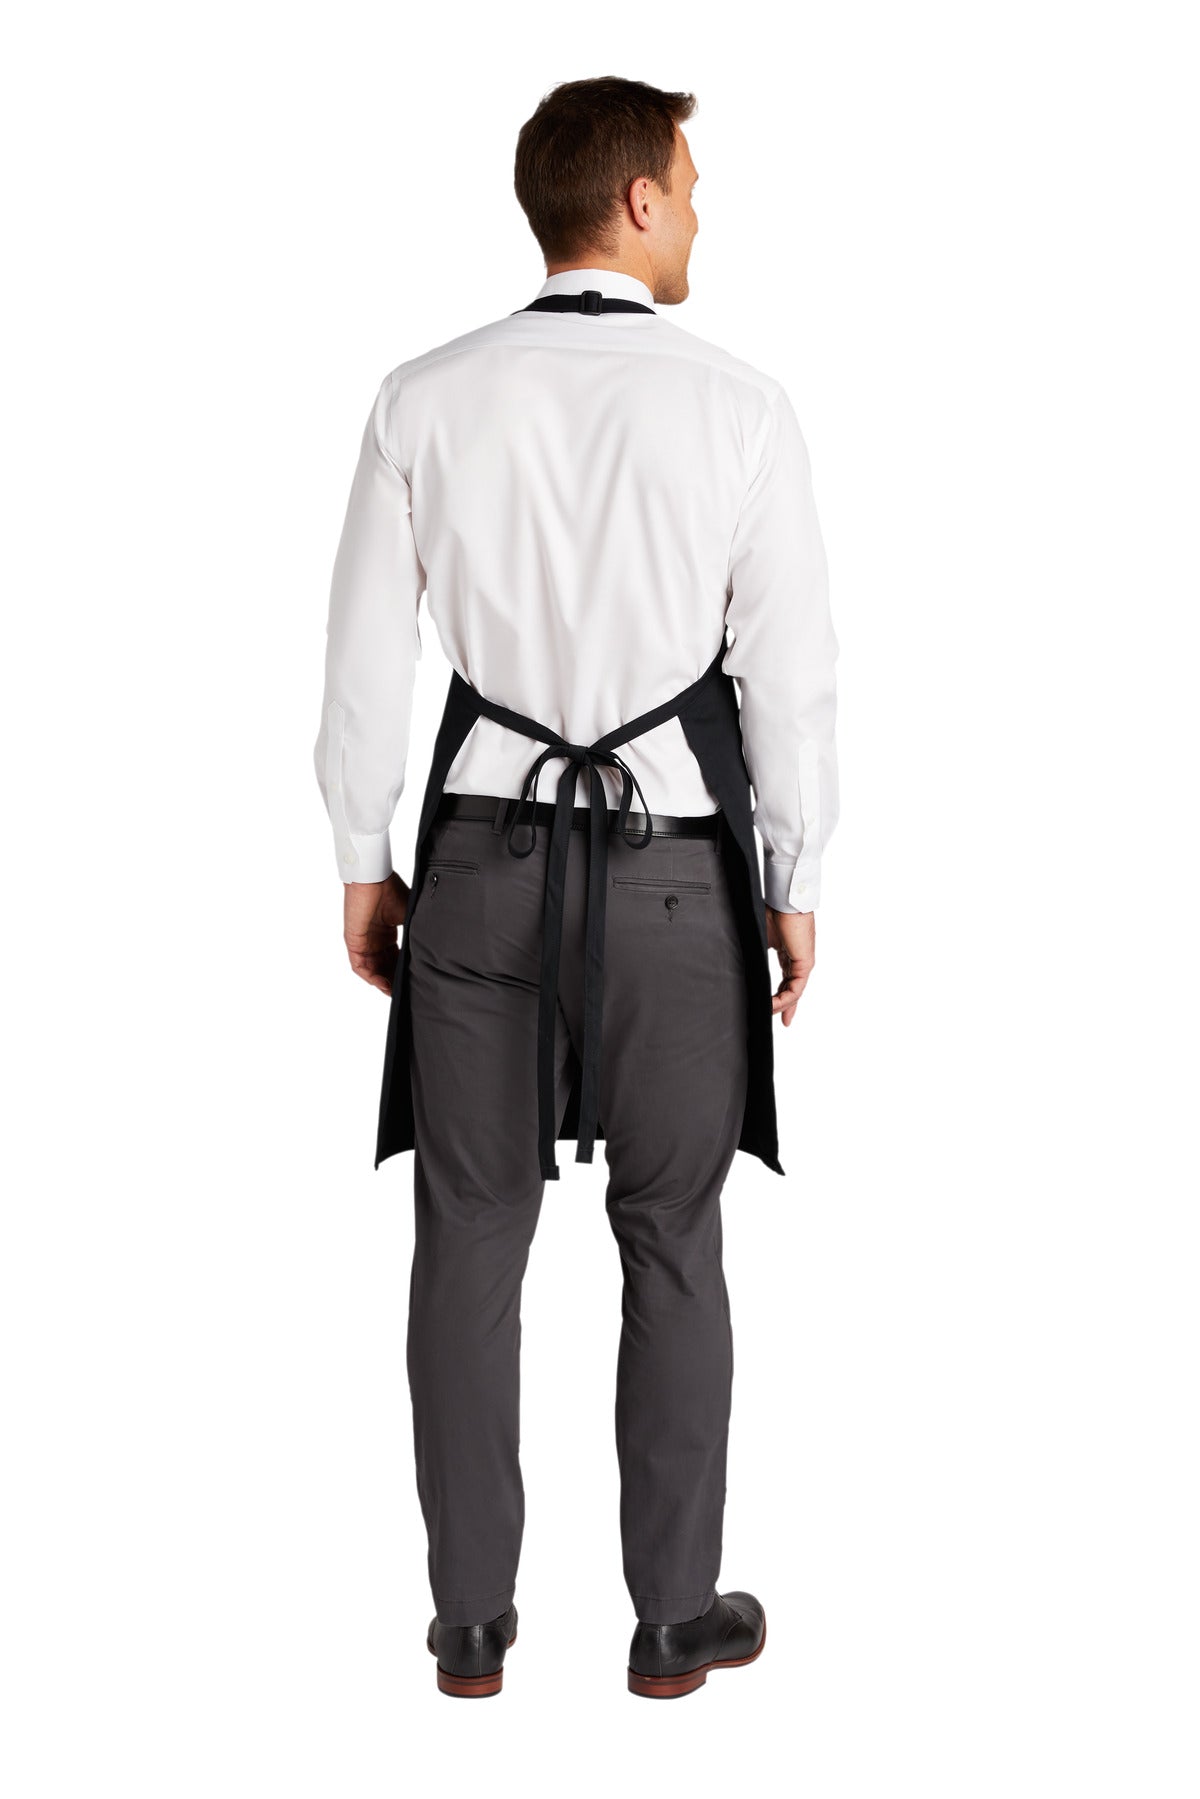 Port Authority® Easy Care Tuxedo Apron with Stain Release. A704 - DFW Impression